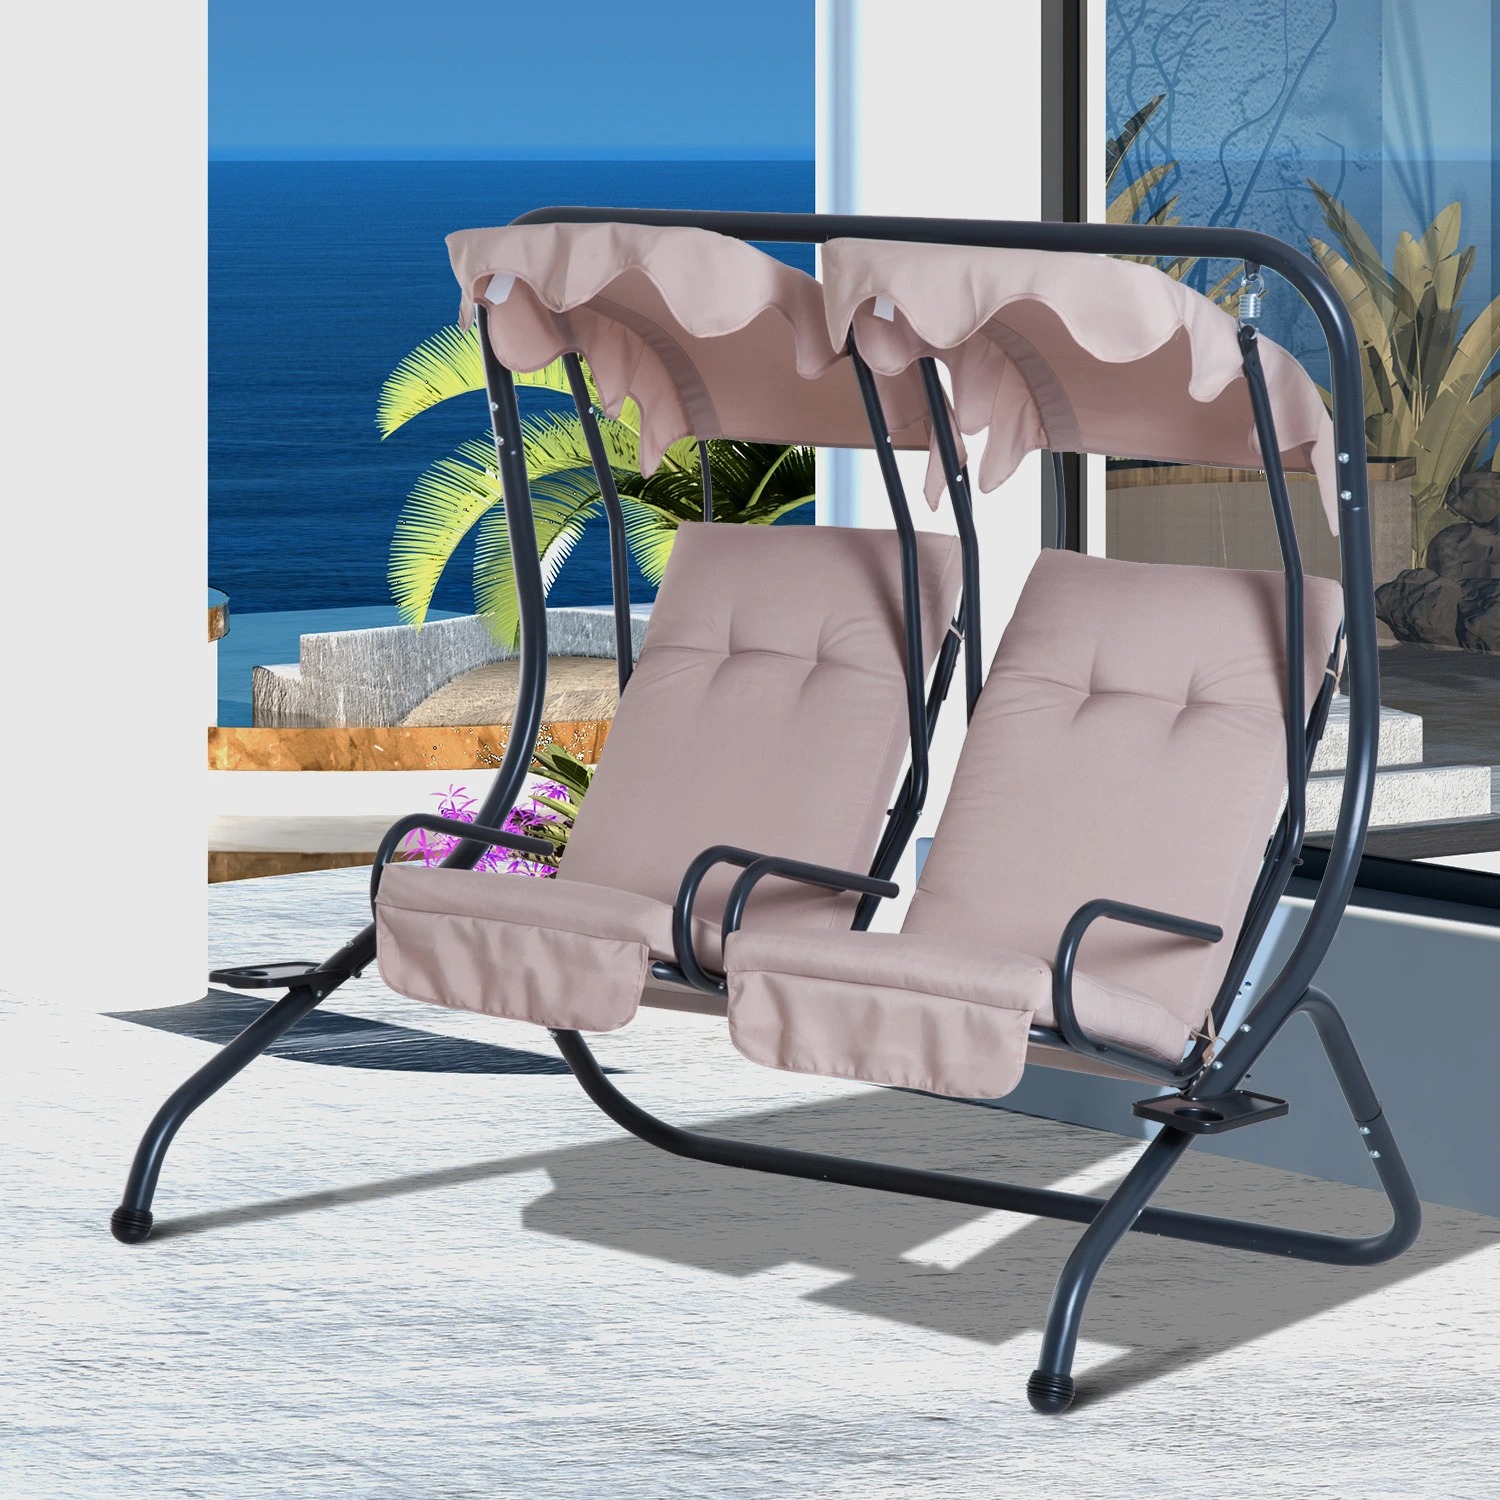 Outsunny 2 Seat Modern Outdoor Swing Chair with Cupholders and Removable Canopy